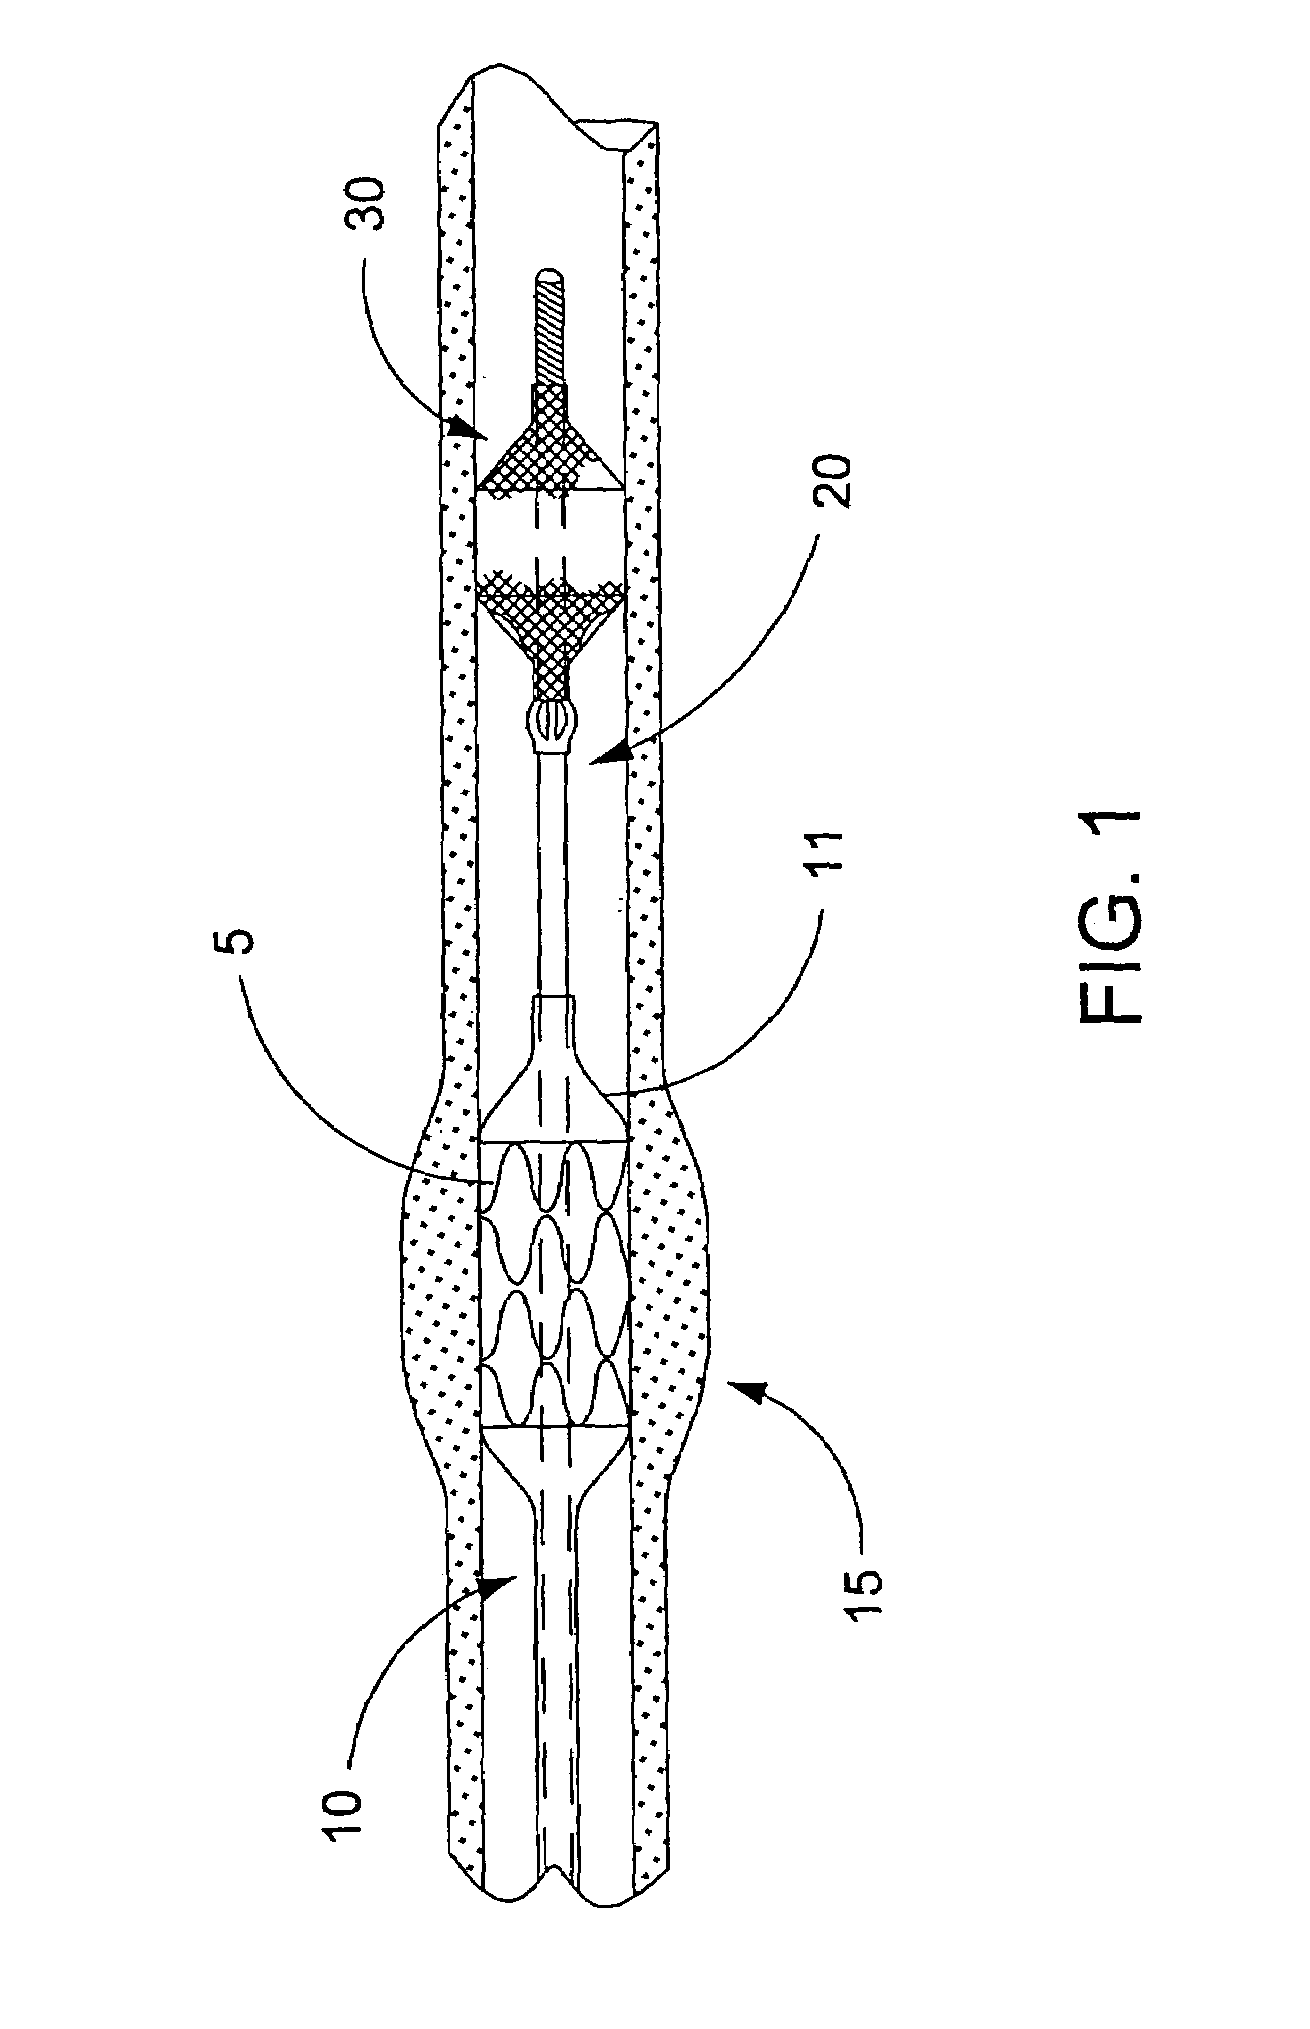 Temporary device for capturing embolic material